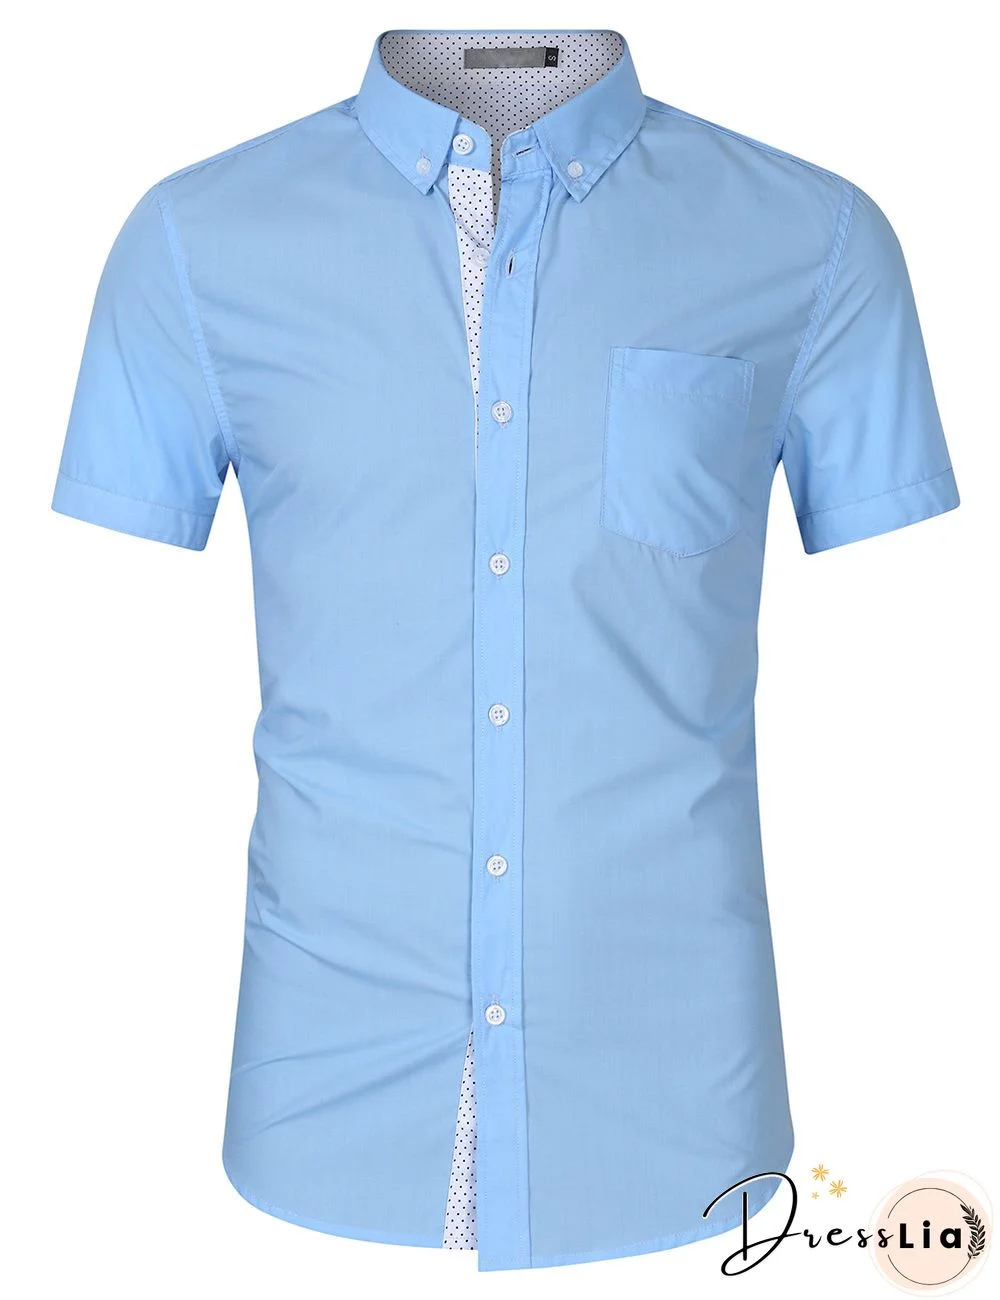 Men's Casual Button Up Slim Fit Short Sleeve Shirt